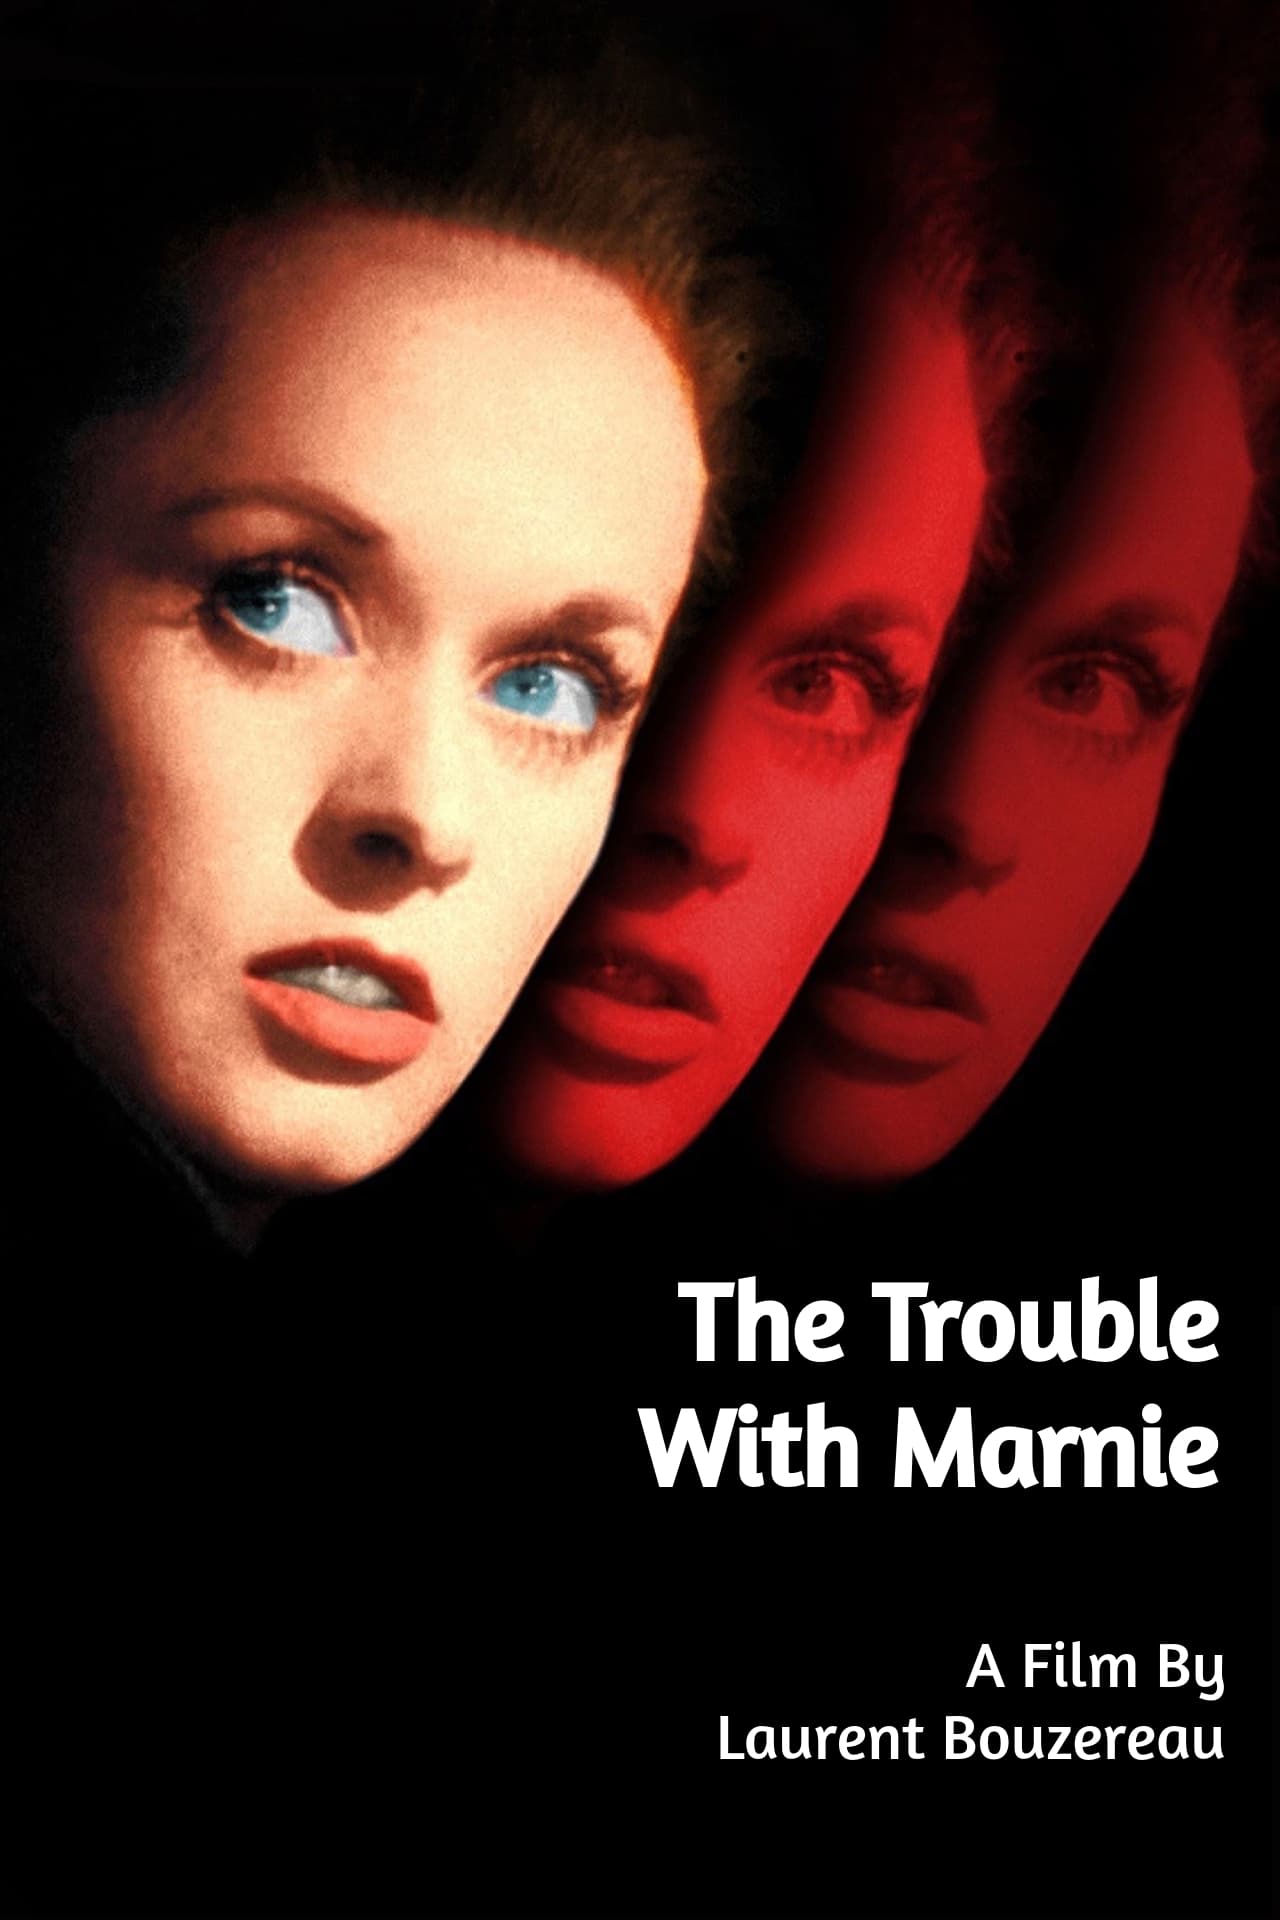 The Trouble with Marnie (2000)